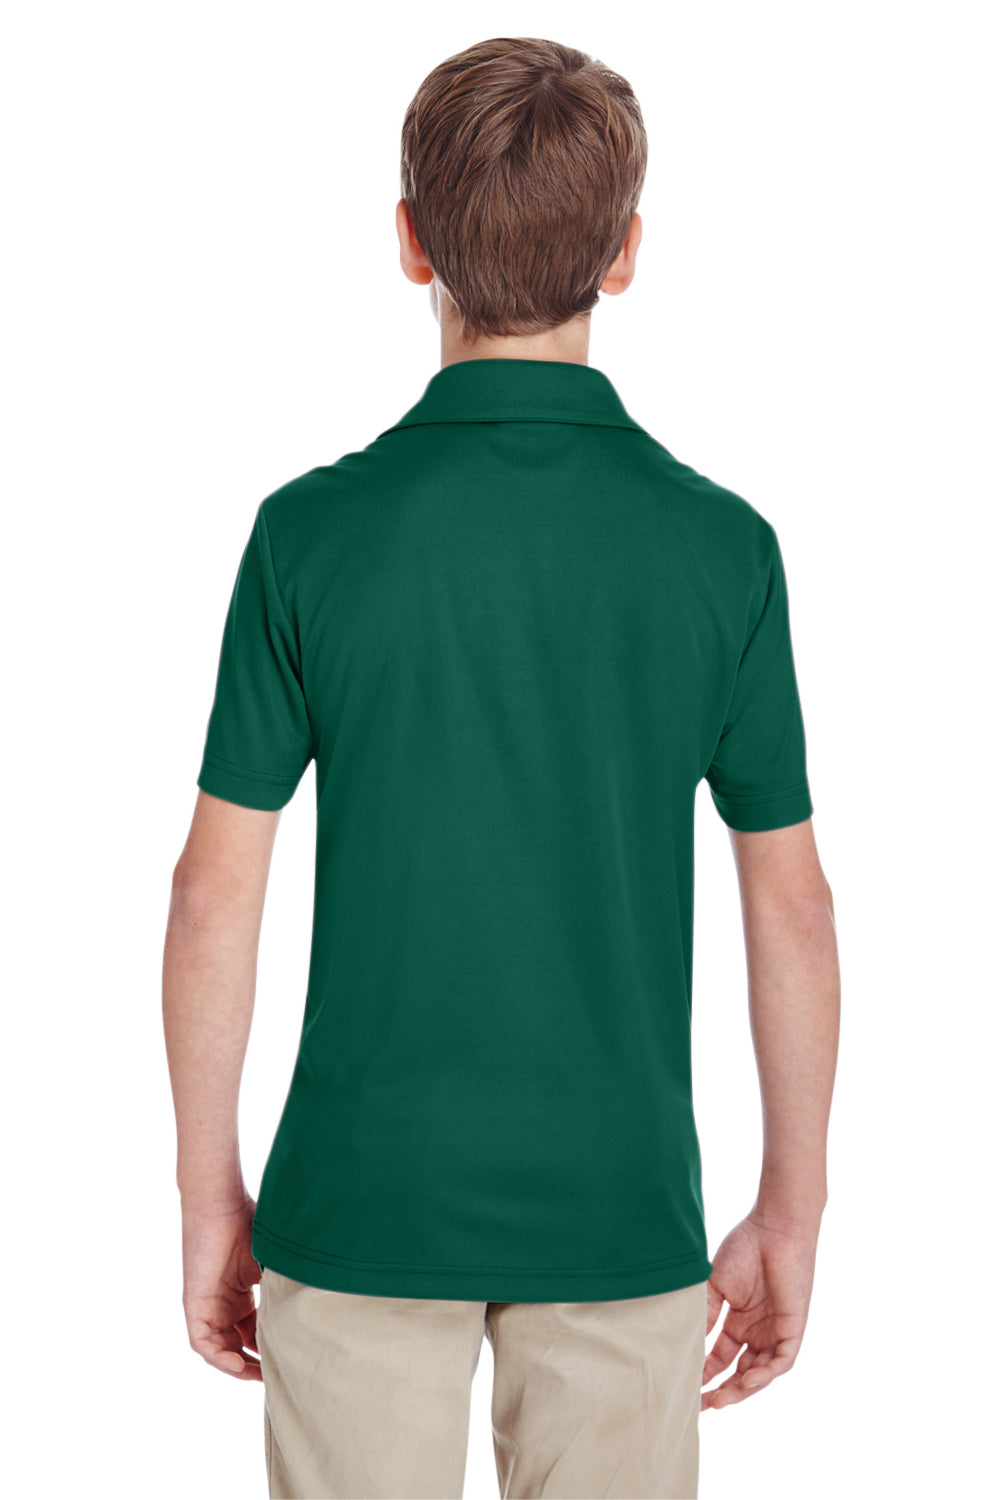 Team 365 TT51Y Youth Zone Performance Moisture Wicking Short Sleeve Polo Shirt Forest Green Back